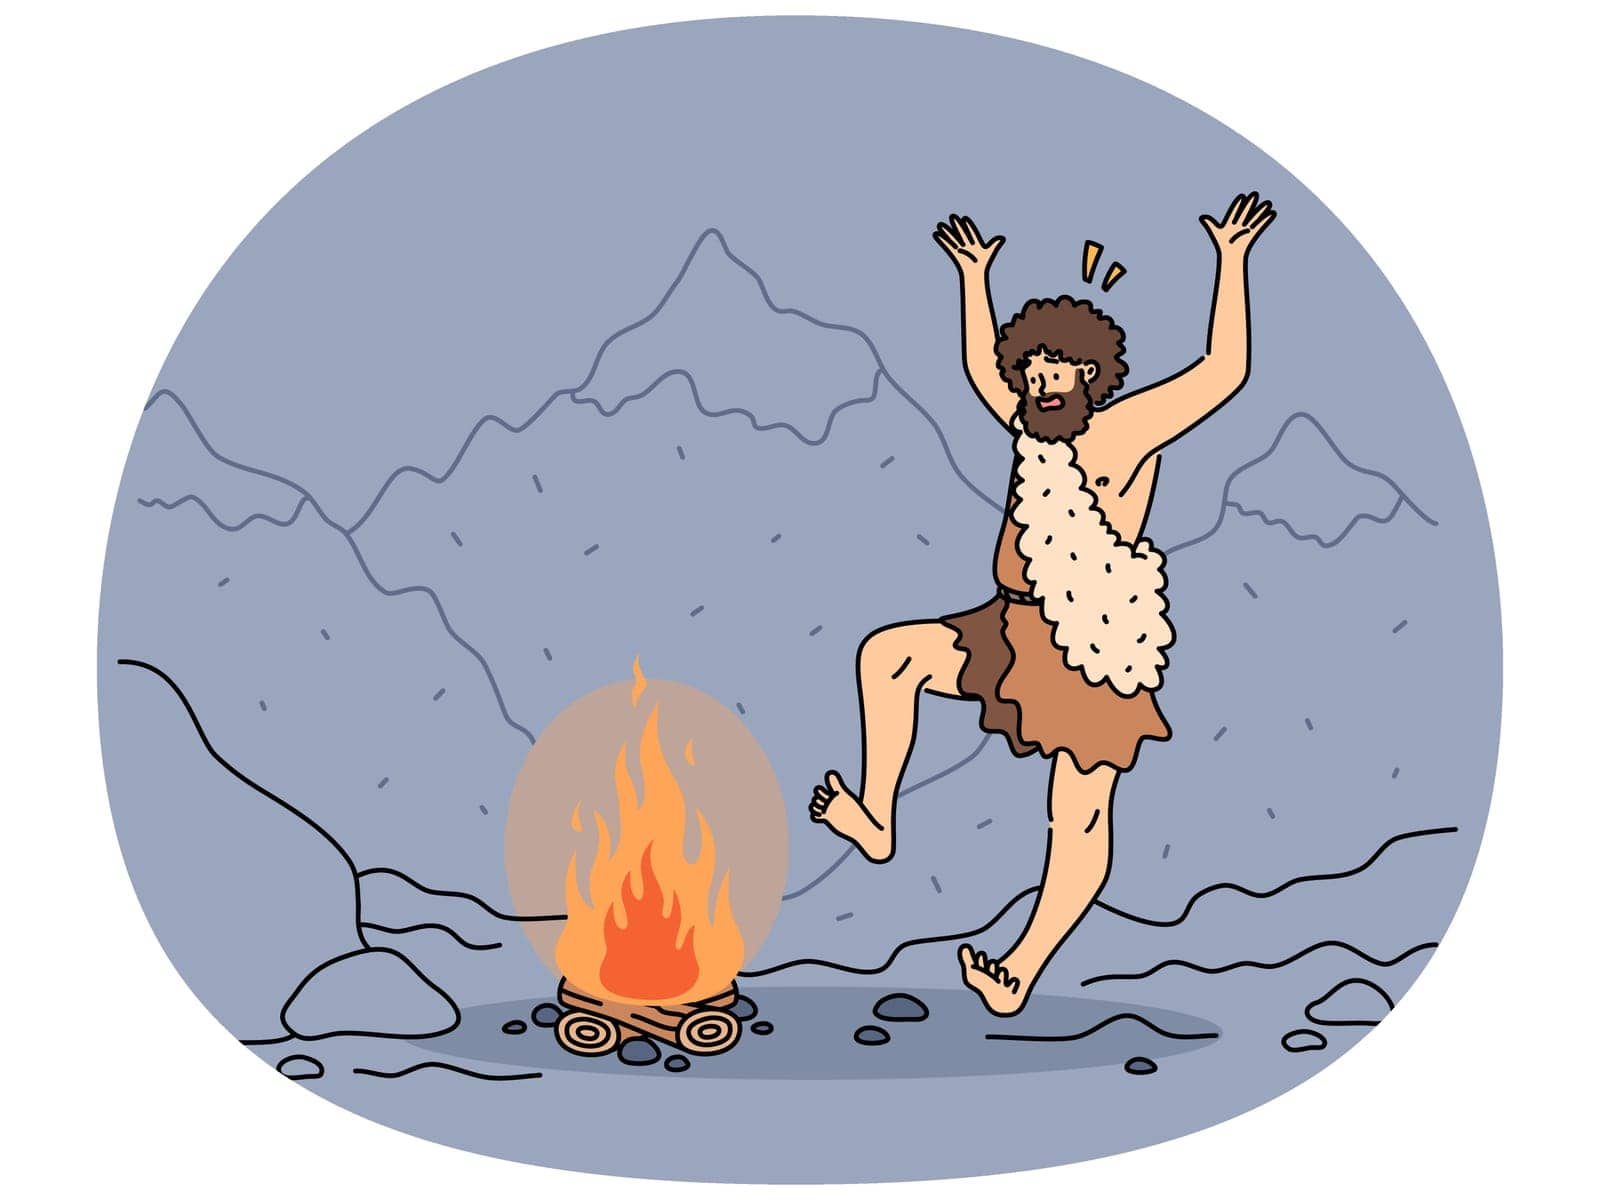 Indigenous man dancing near fire in nature. Tribal male ancestor near campfire in mountains landscape. Vector illustration.